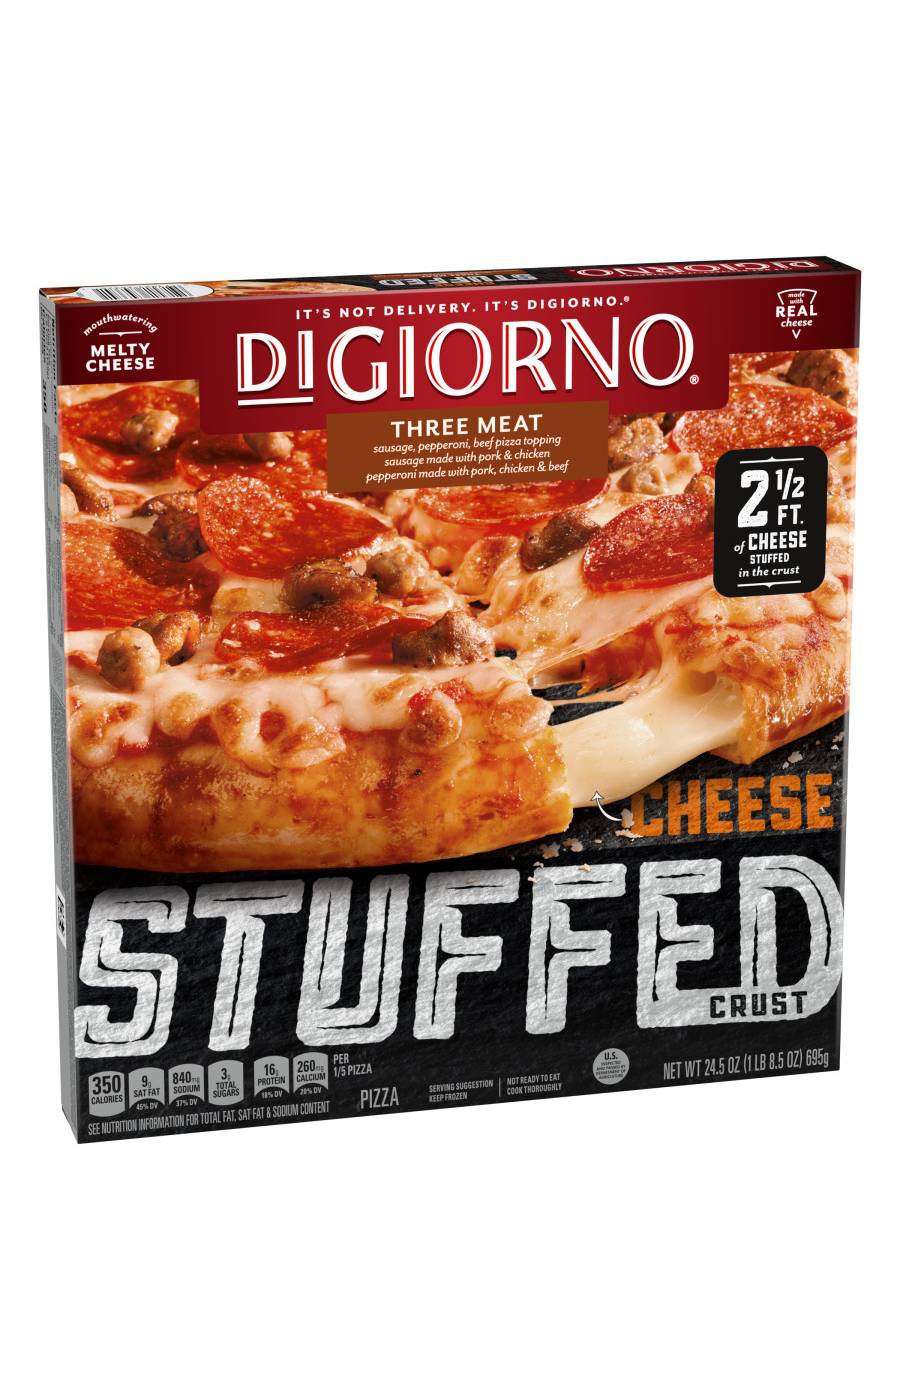 DiGiorno Cheese Stuffed Crust Frozen Pizza - Three Meat; image 6 of 7